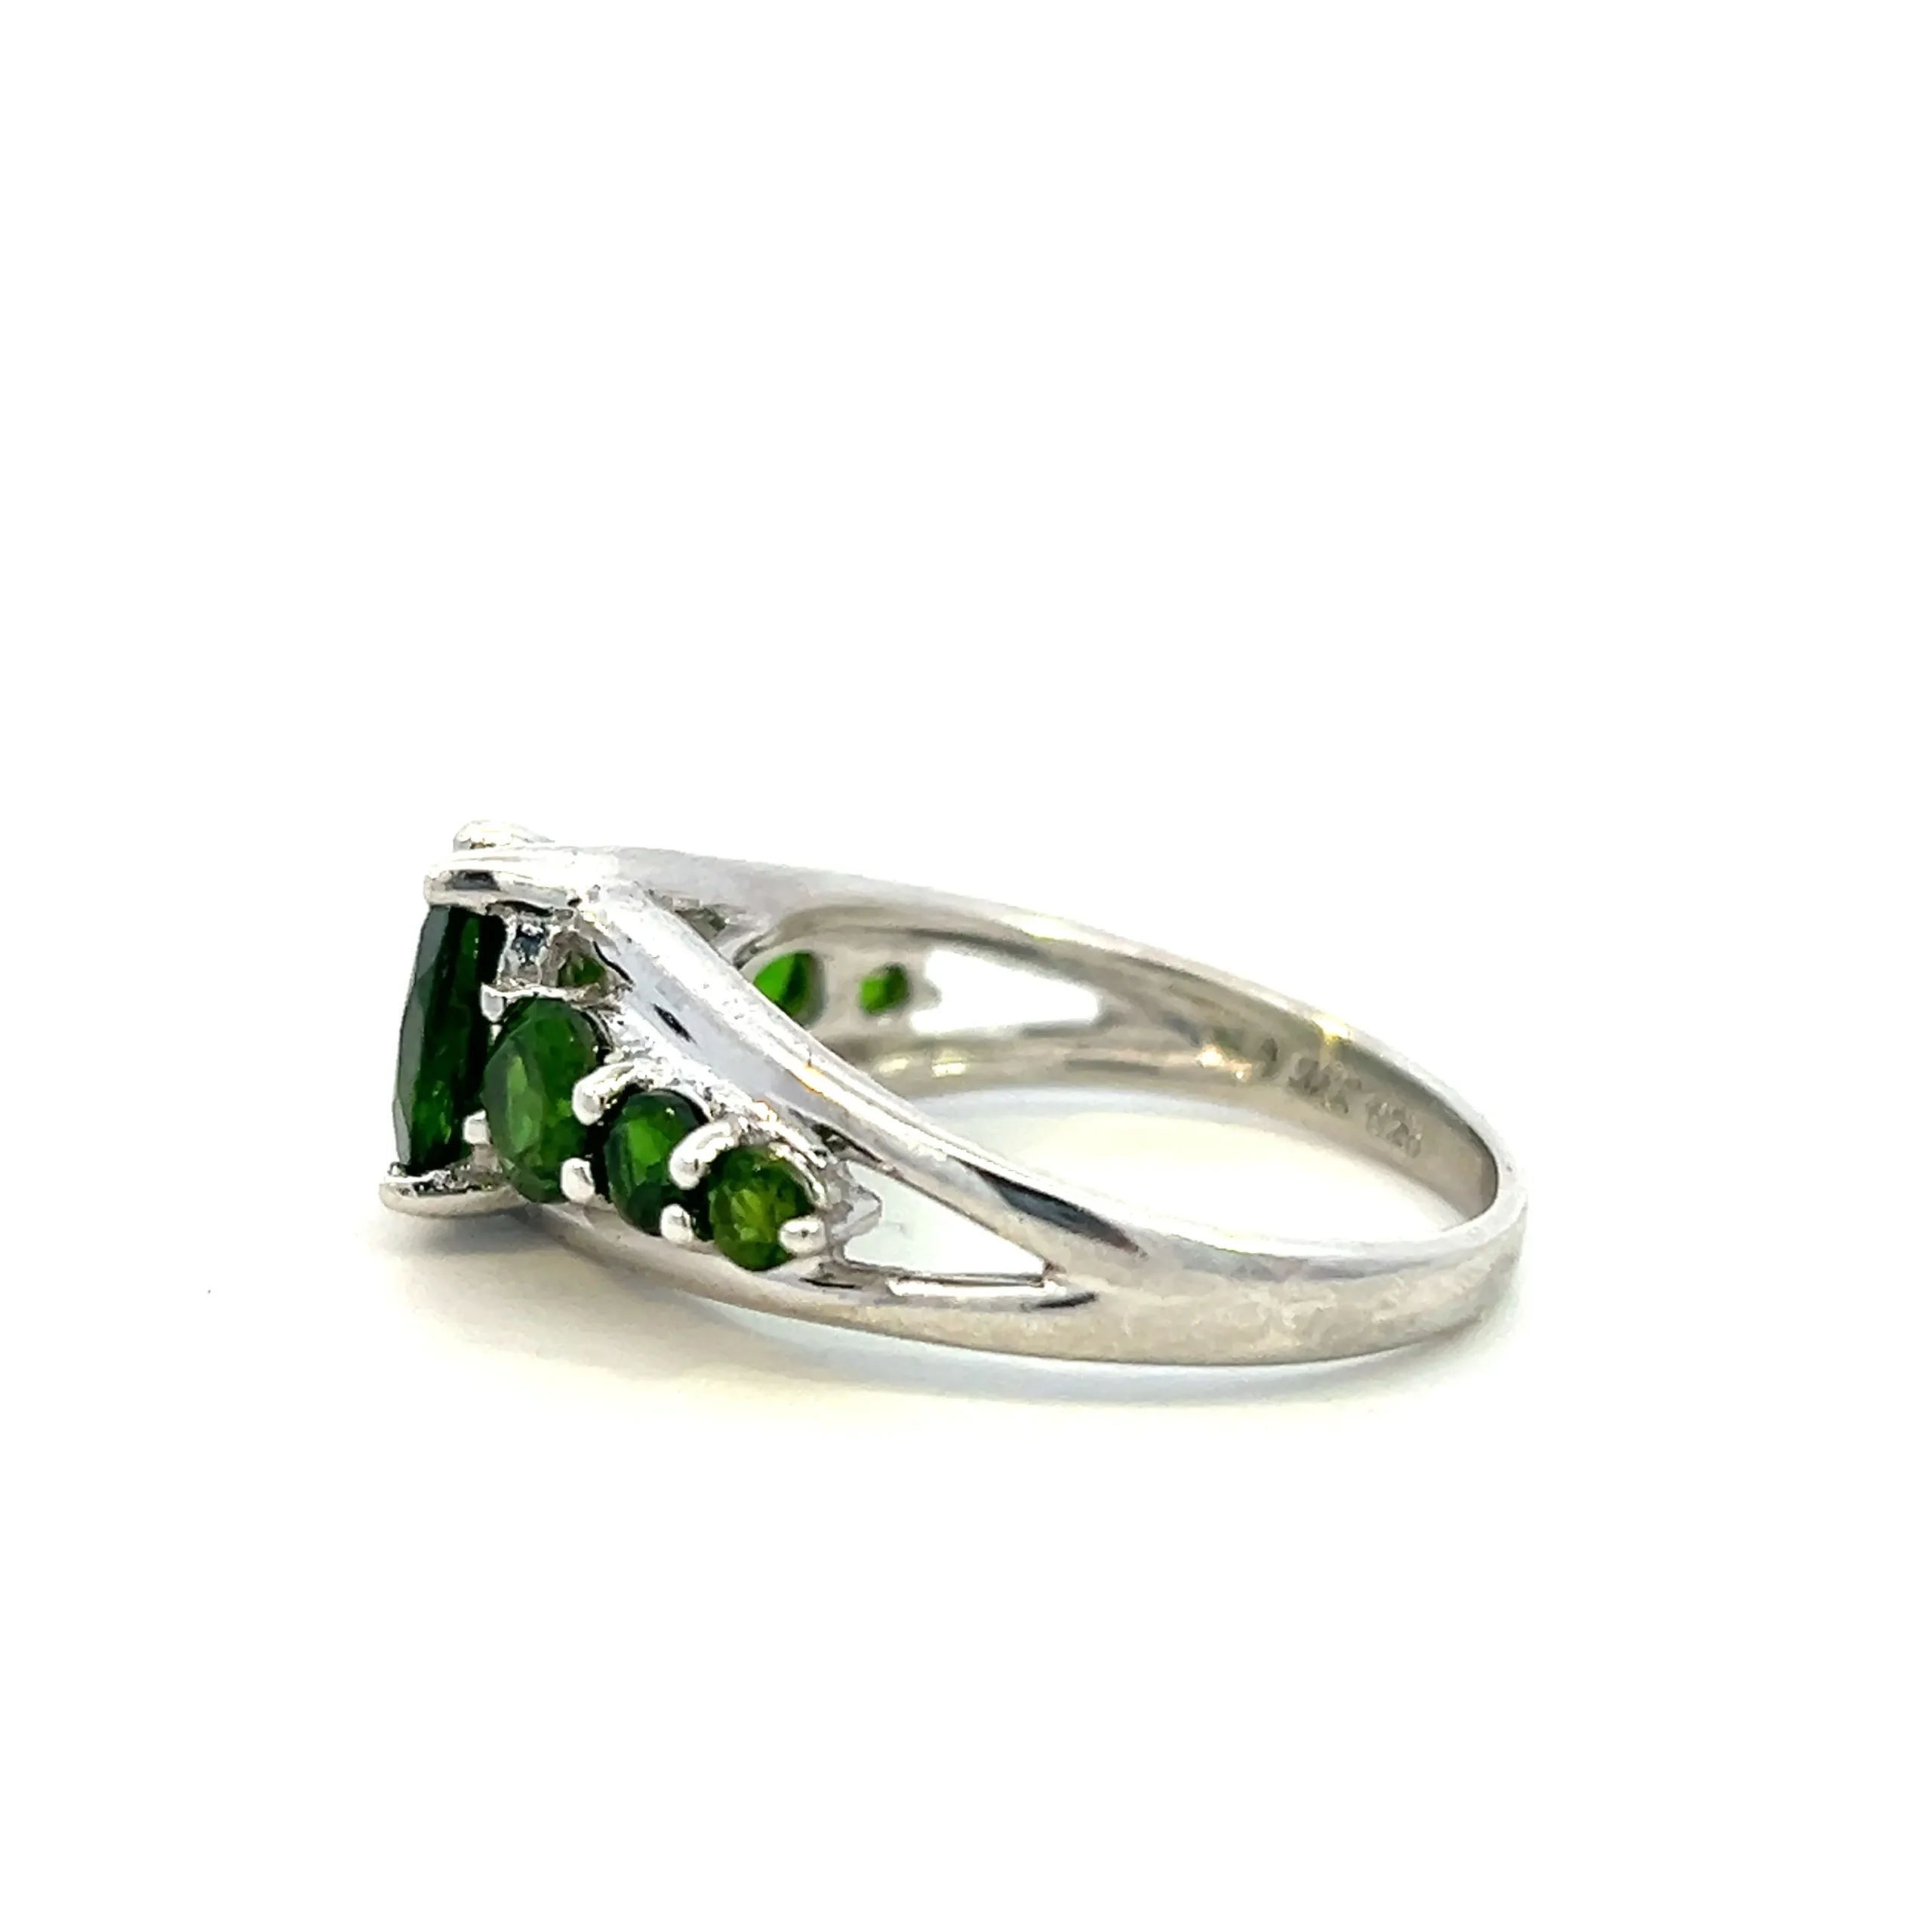 One estate sterling silver quartz ring with a center oval dark green quartz with 3 round dark green quartzes set in each shoulder of the band in graduating sizes.